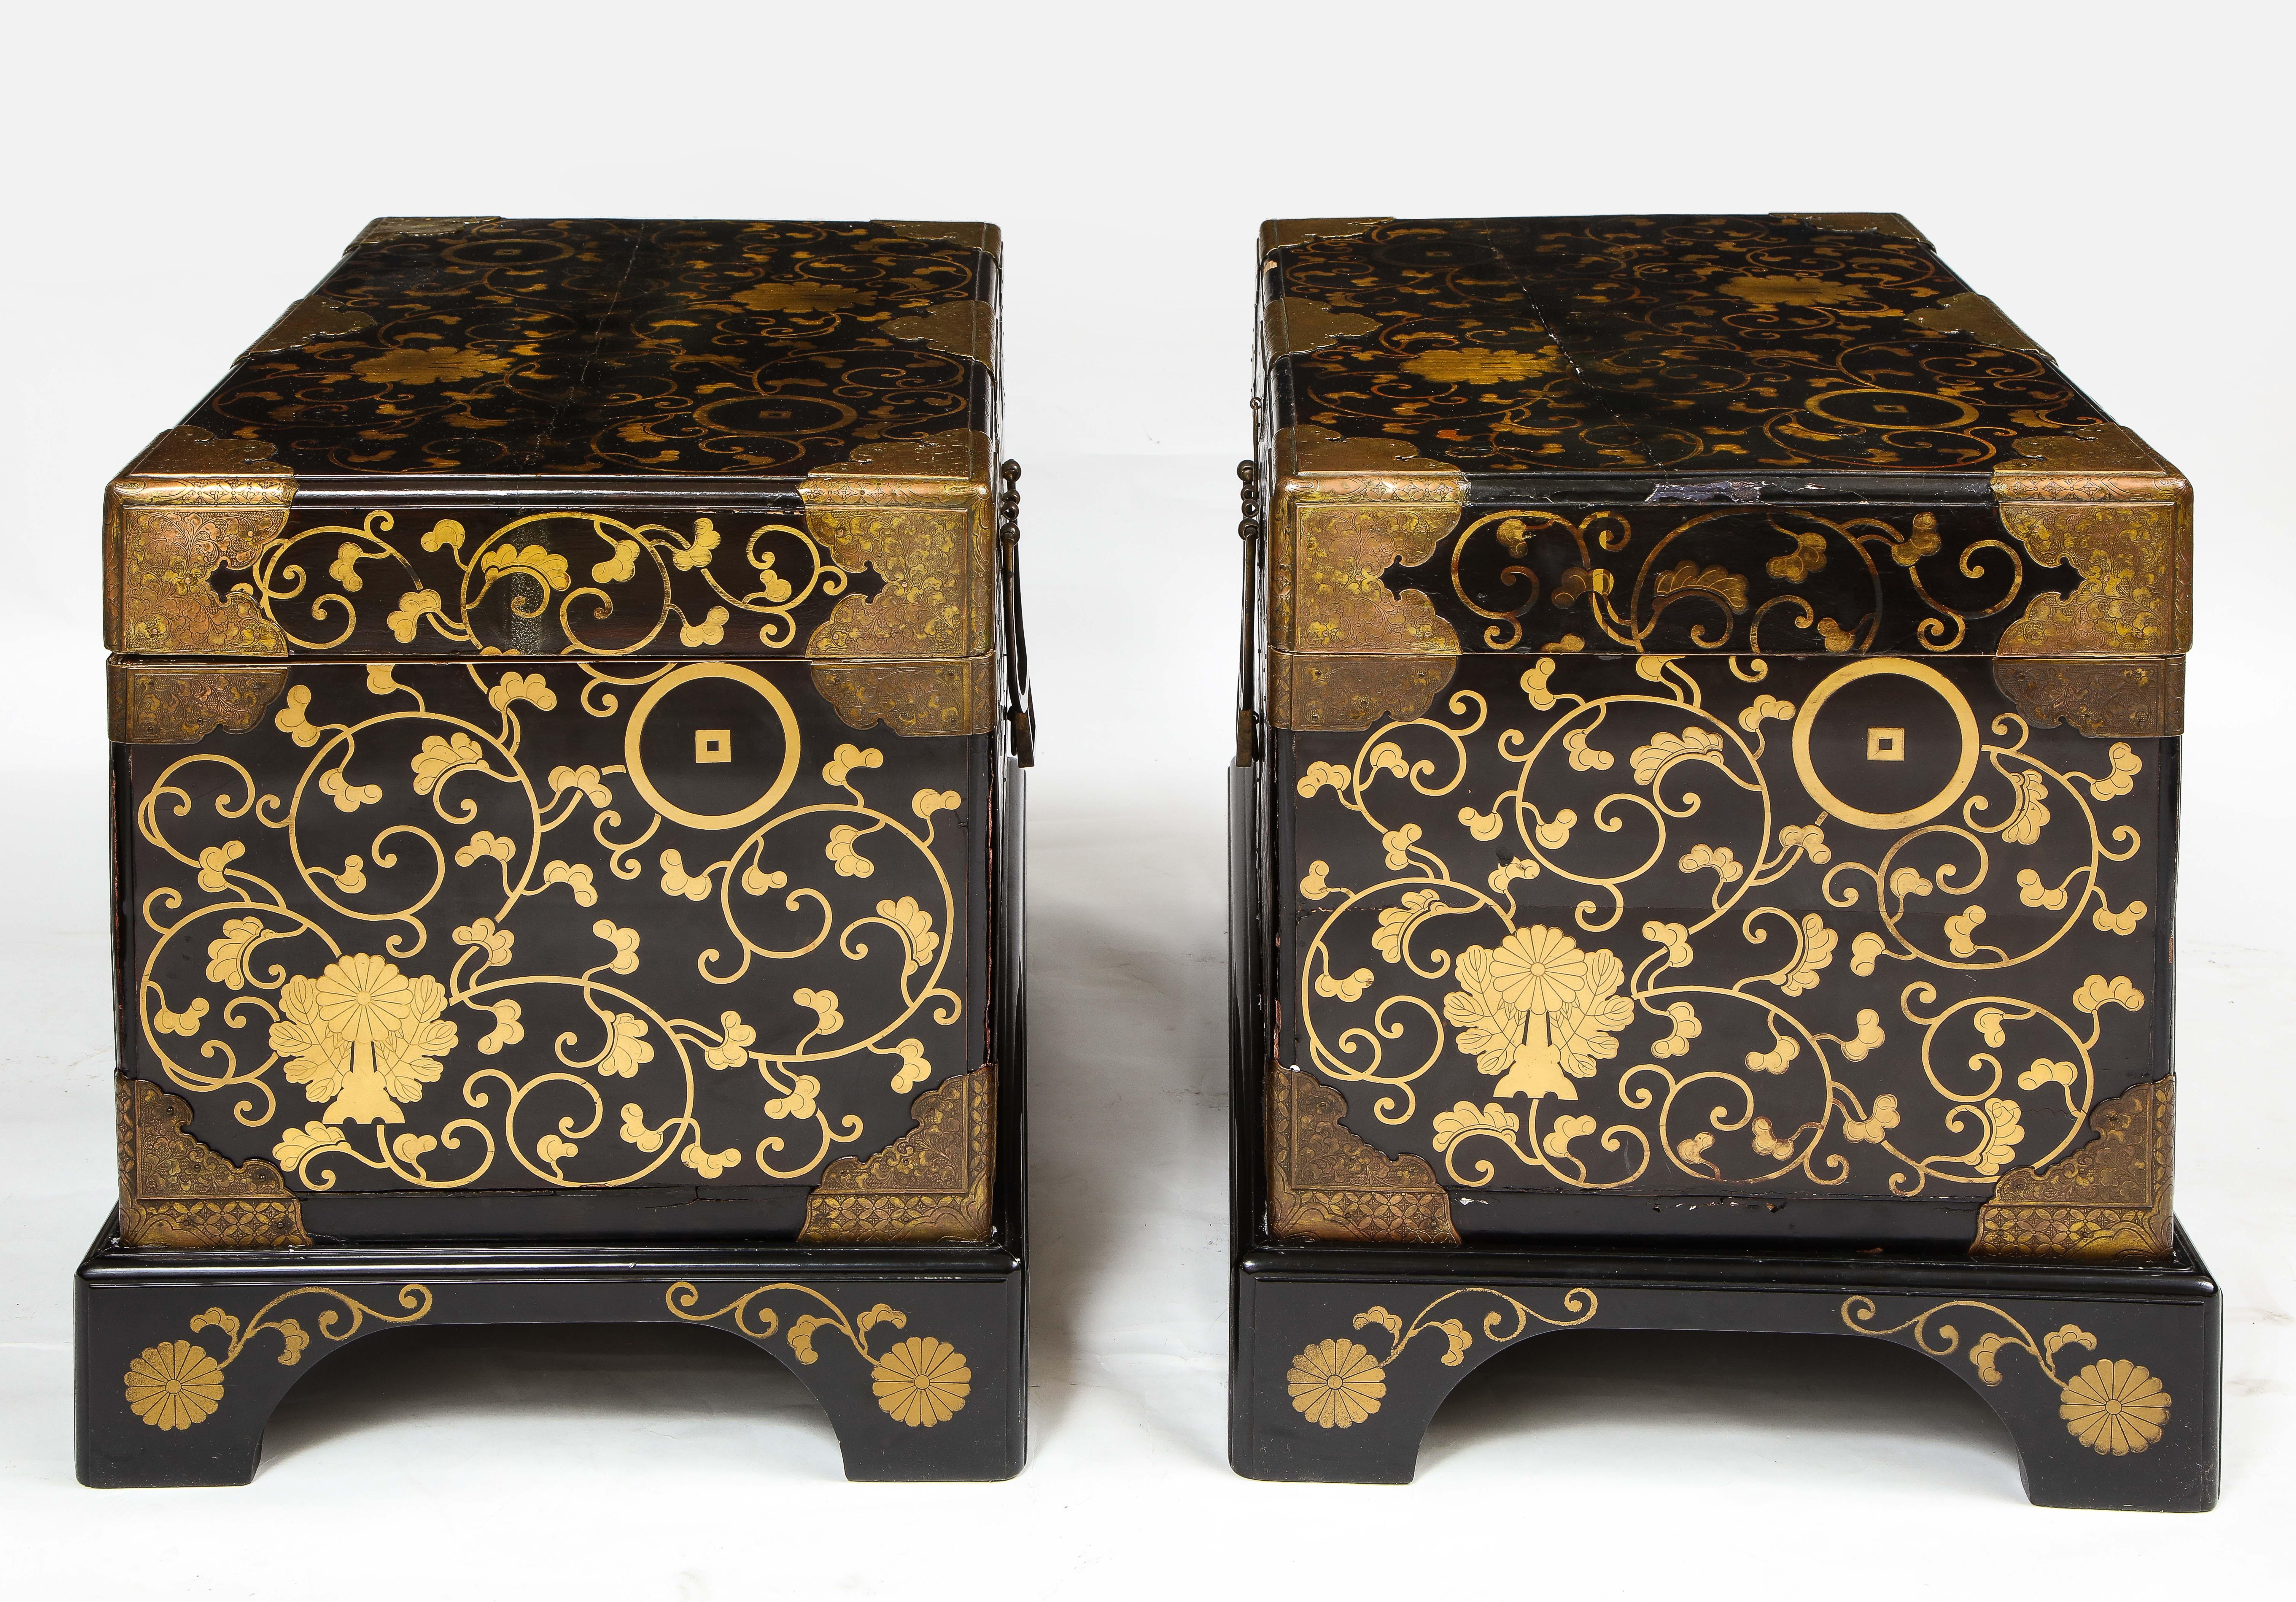  Pair of 19th Century Japanese Meiji Period Dore Bronze Mounted Lacquered Chests For Sale 1